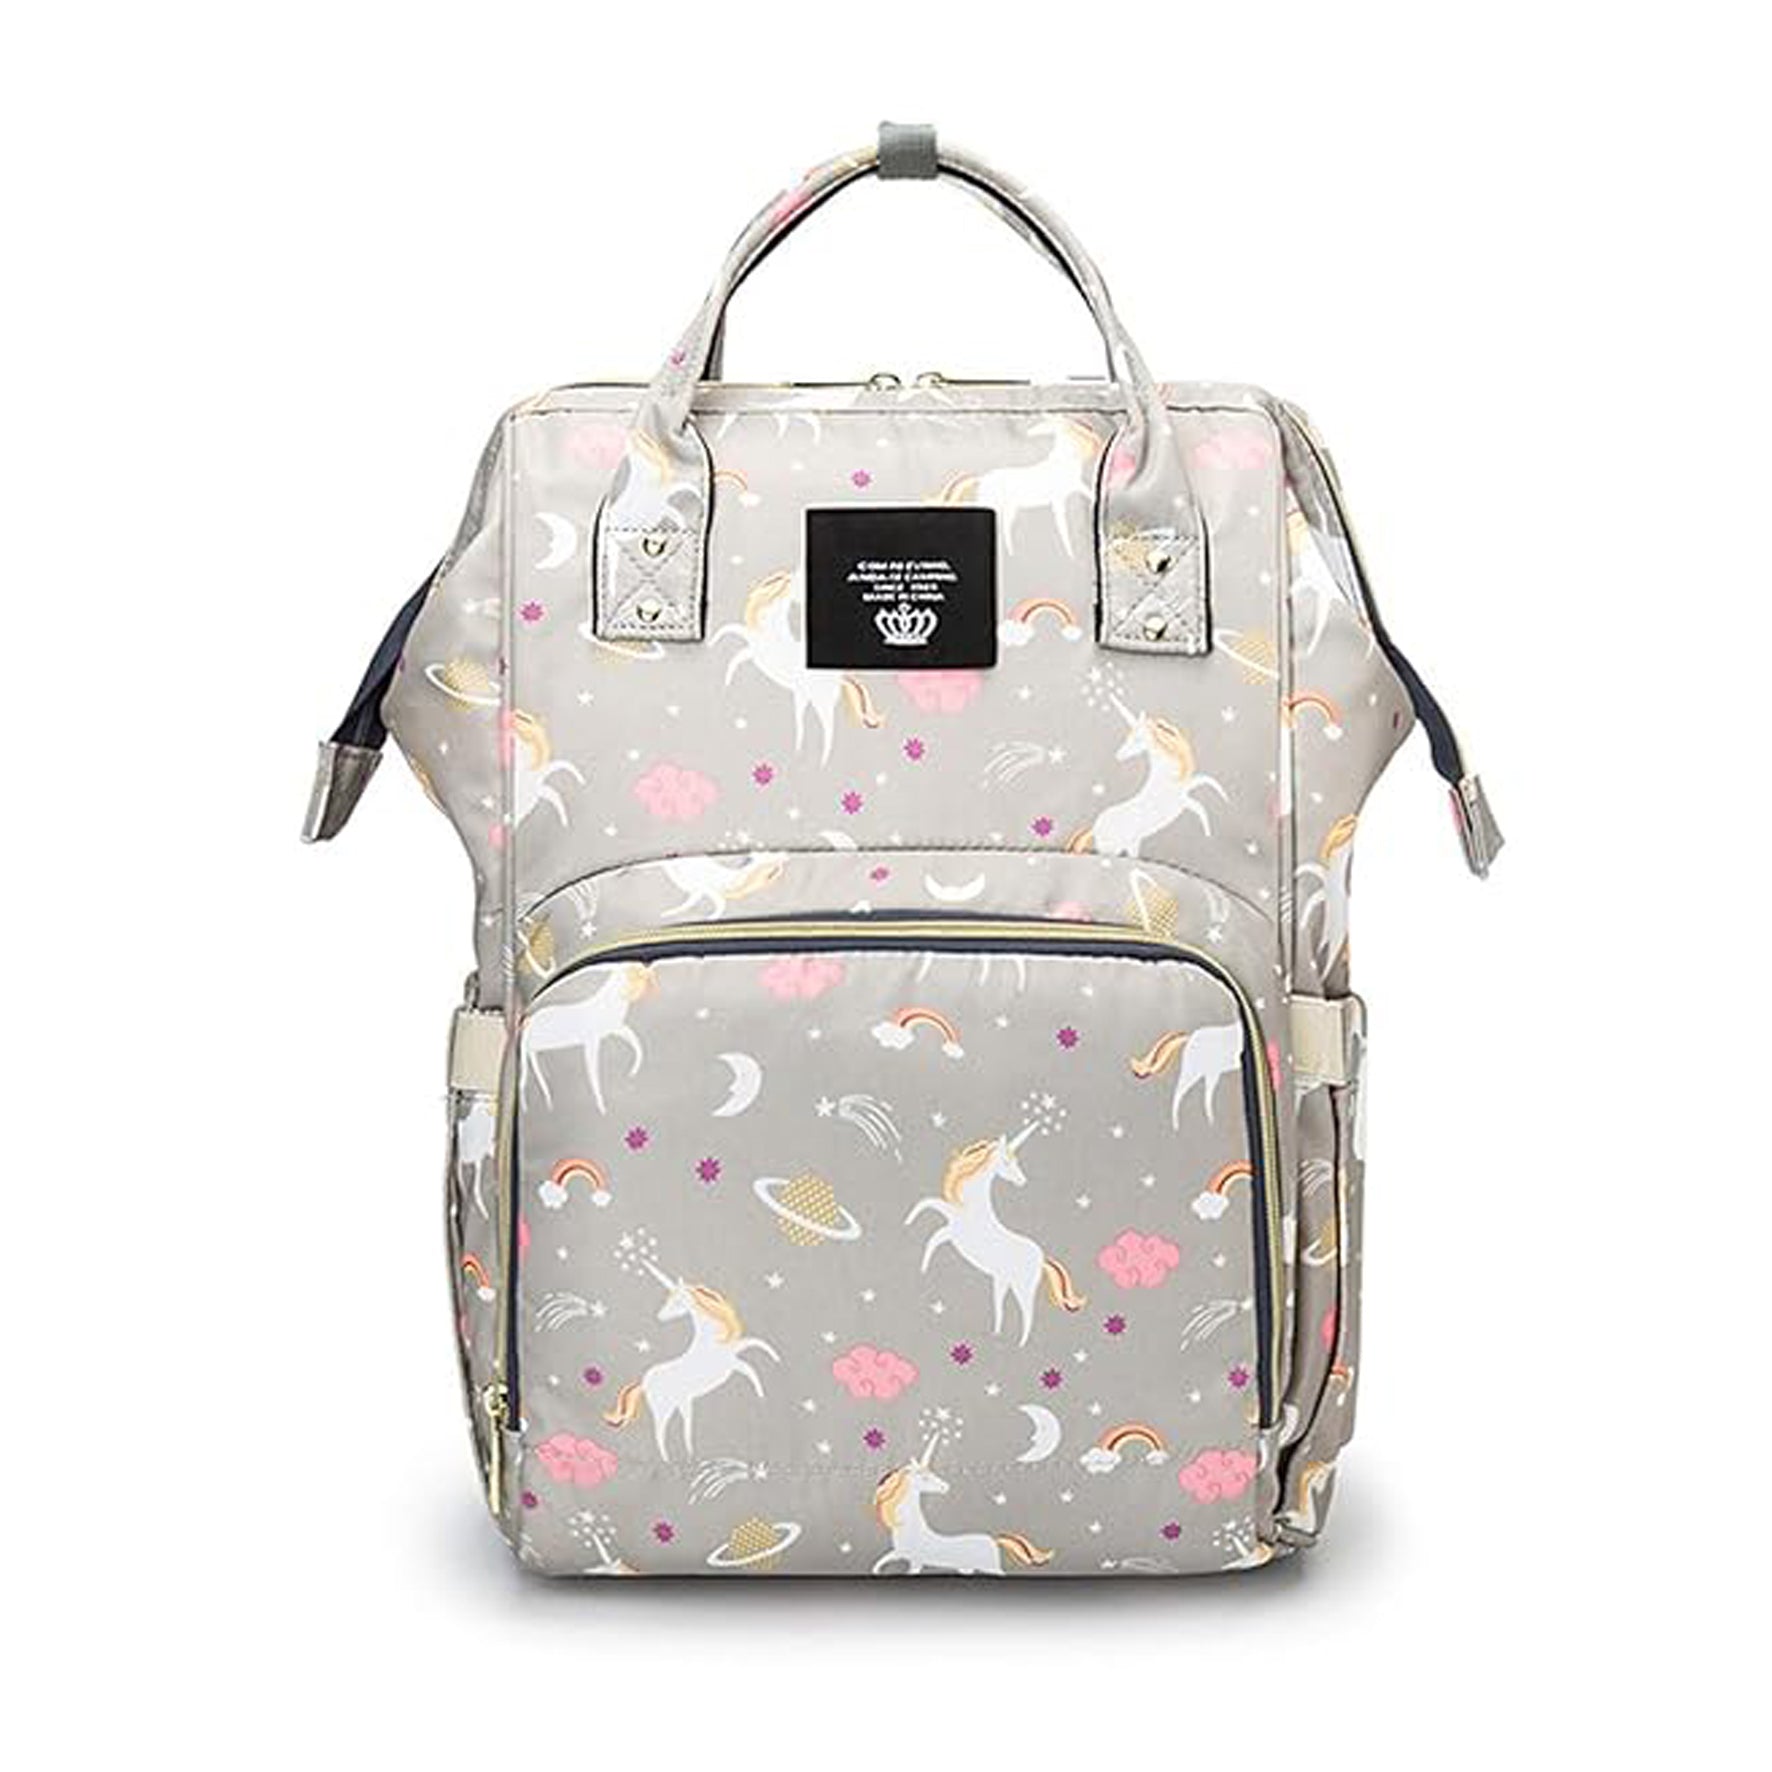 Geek Daily Deals January 8, 2019: Stylist Diaper Bag/Backpack With  Insulated Bottle Sleeve for Just $10 Today! - GeekDad